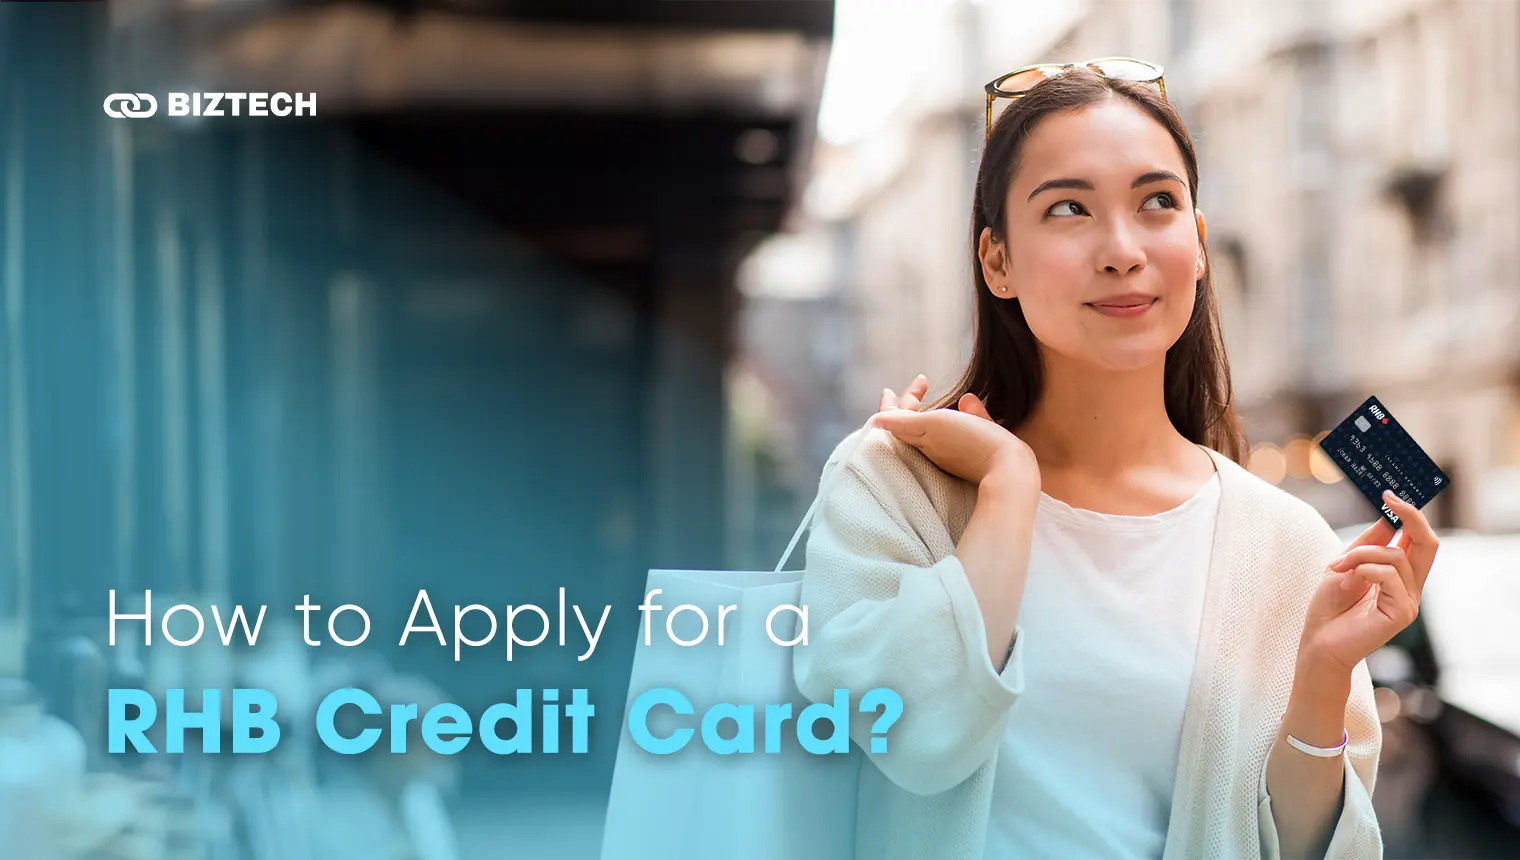 How to Apply for a RHB Credit Card